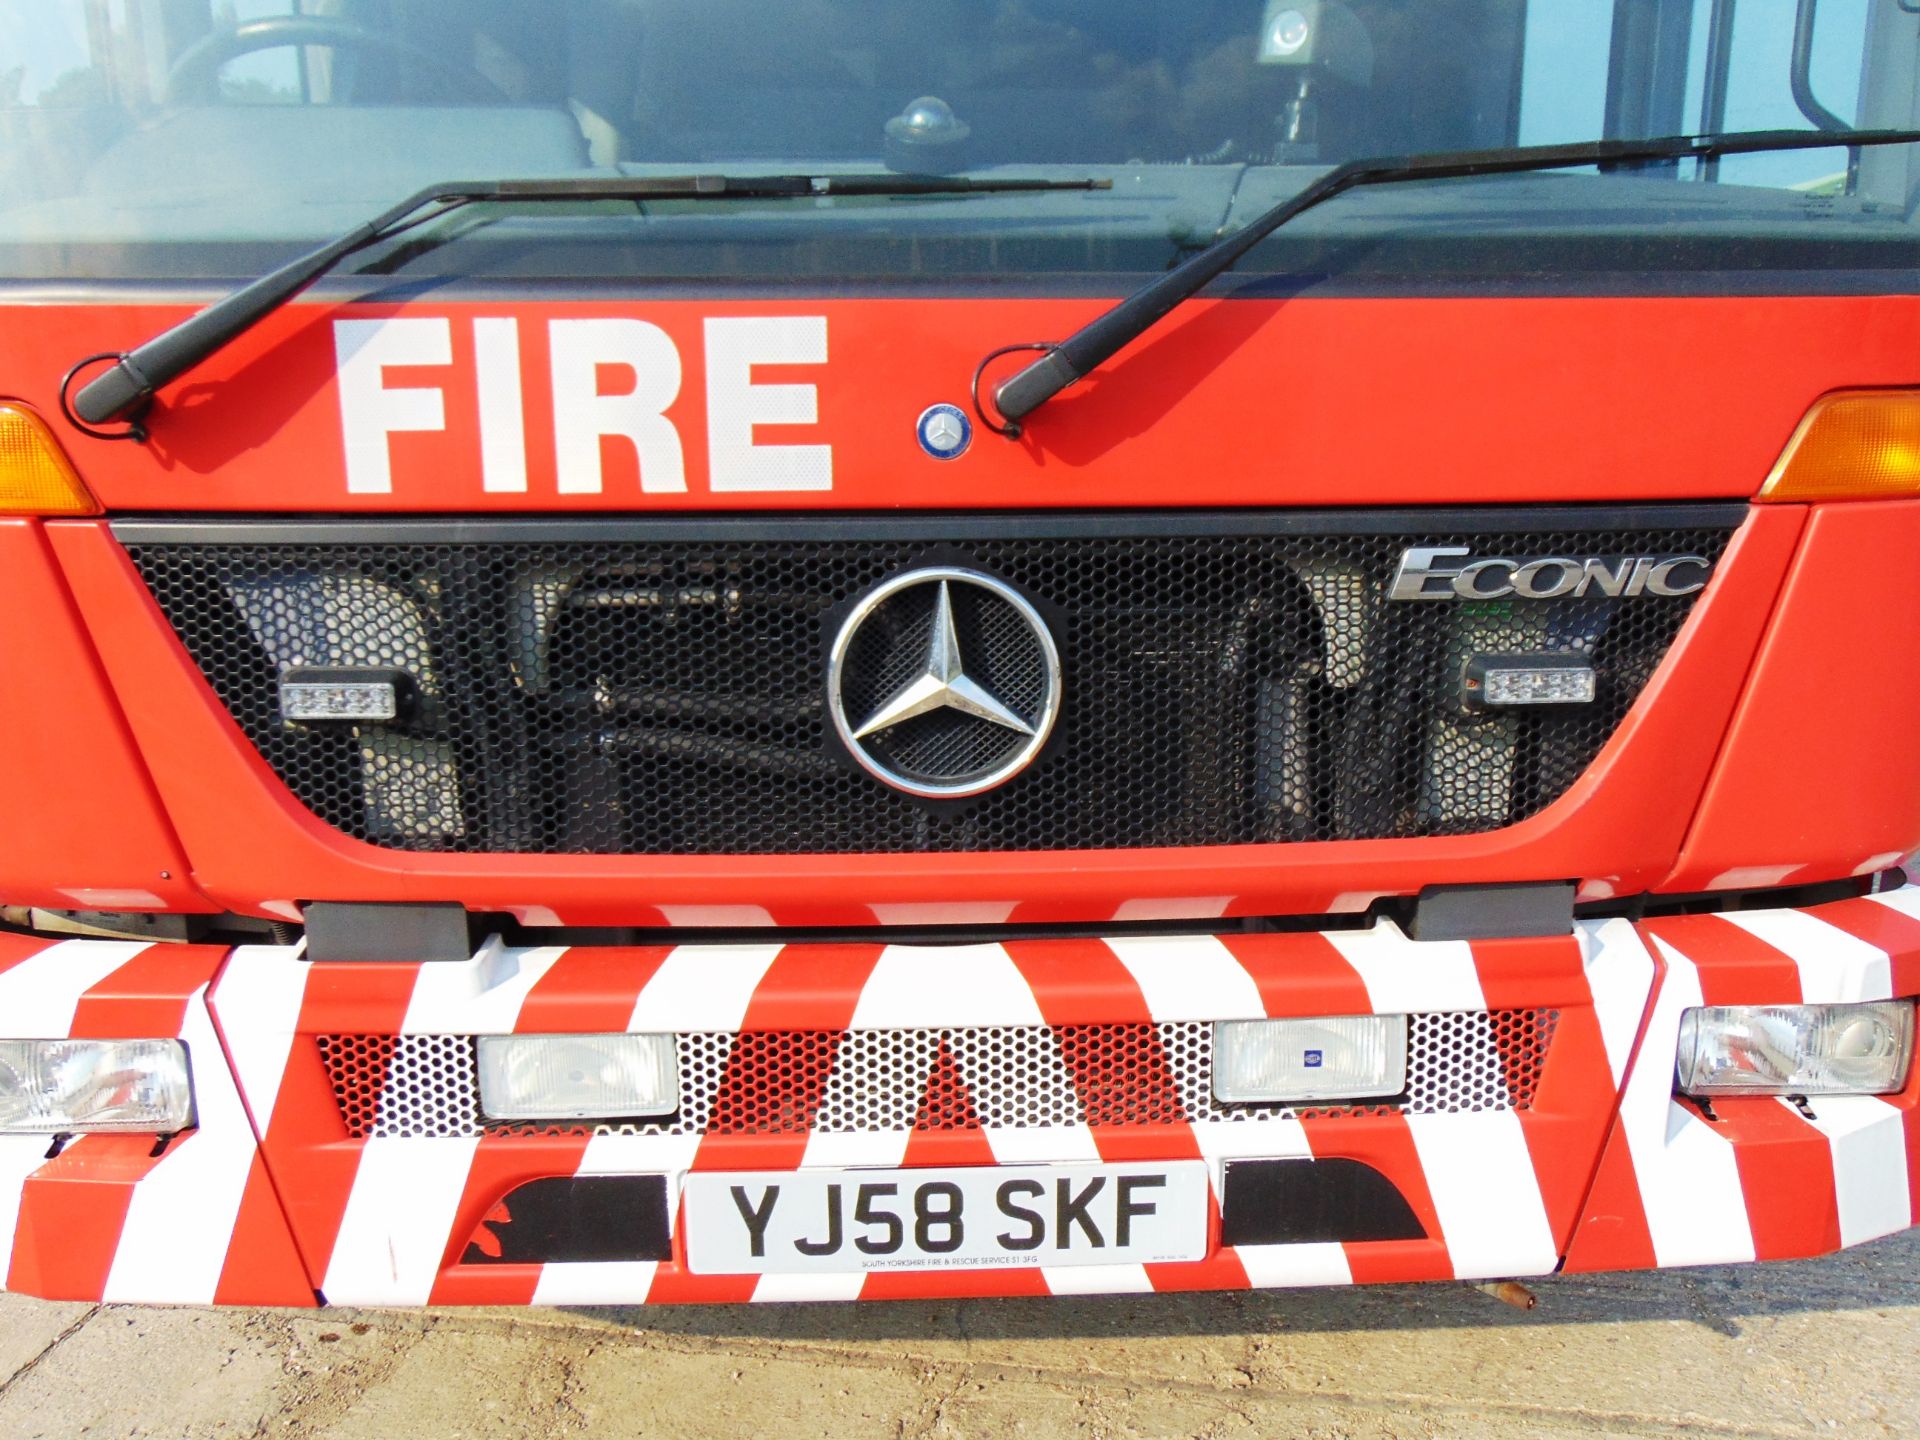 Mercedes Econic 2633 Aerial Rescue Fire Fighting Appliance - Image 49 of 57